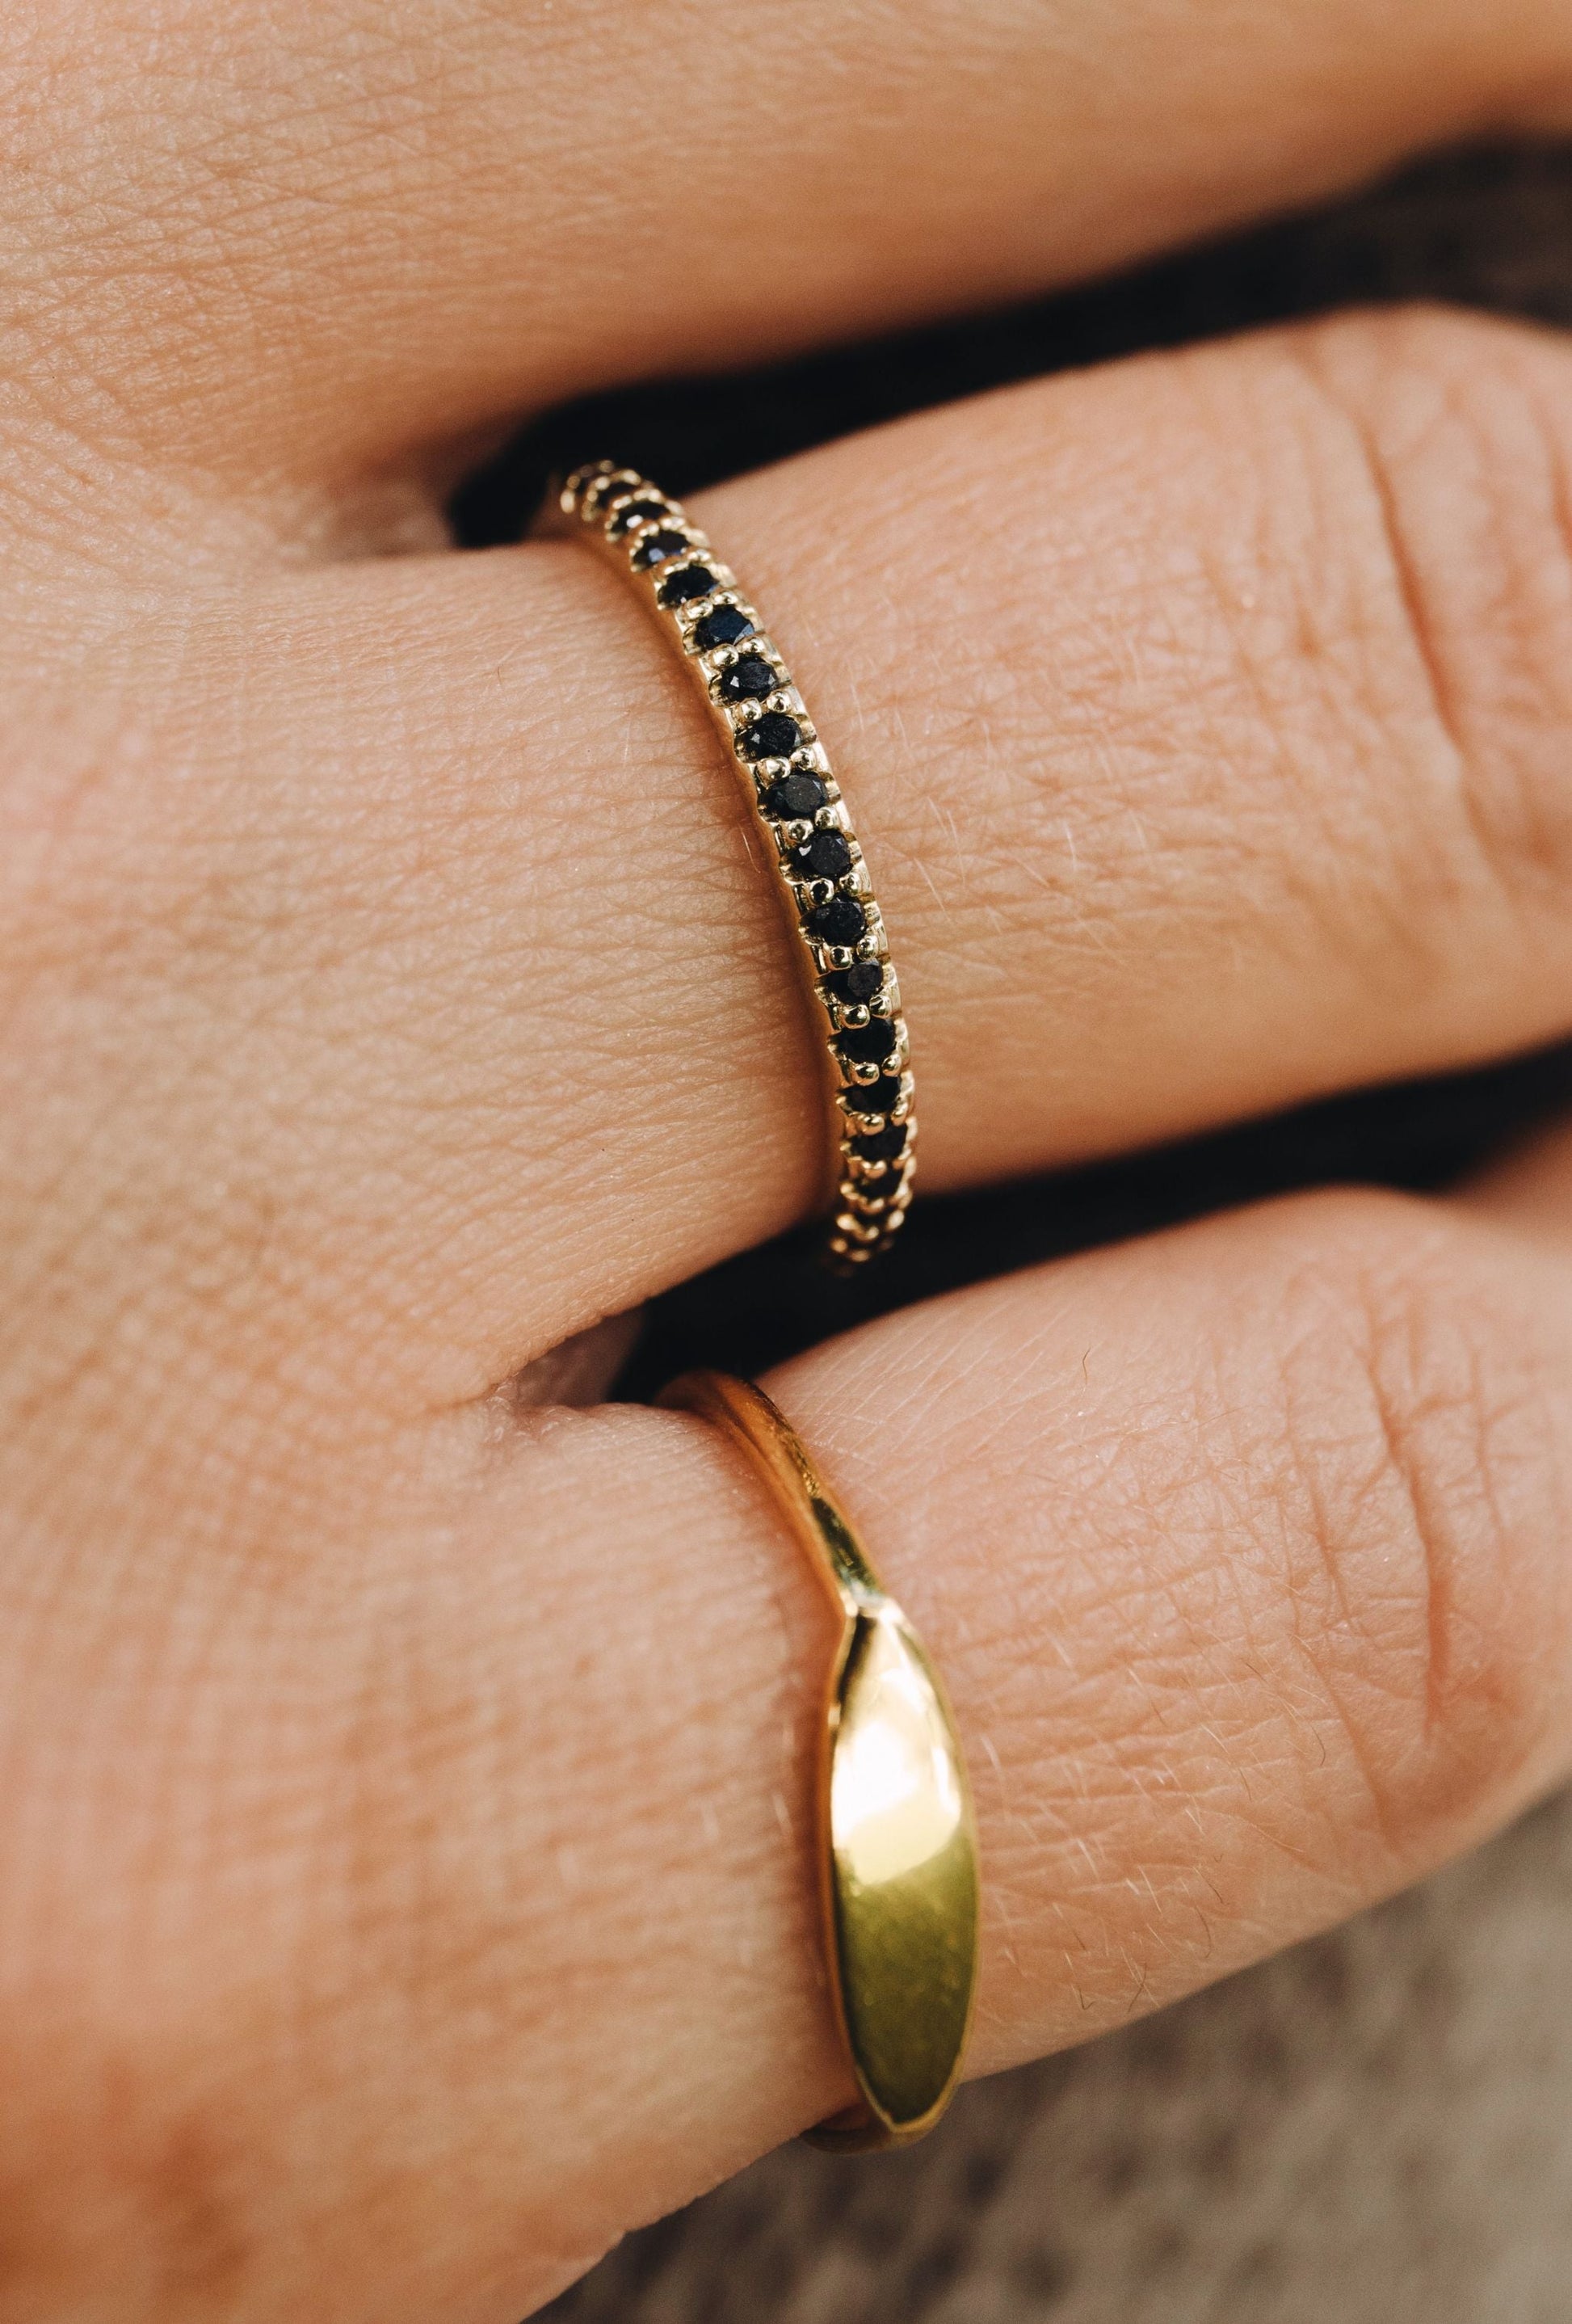 9ct yellow gold signet ring and black diamond eternity ring